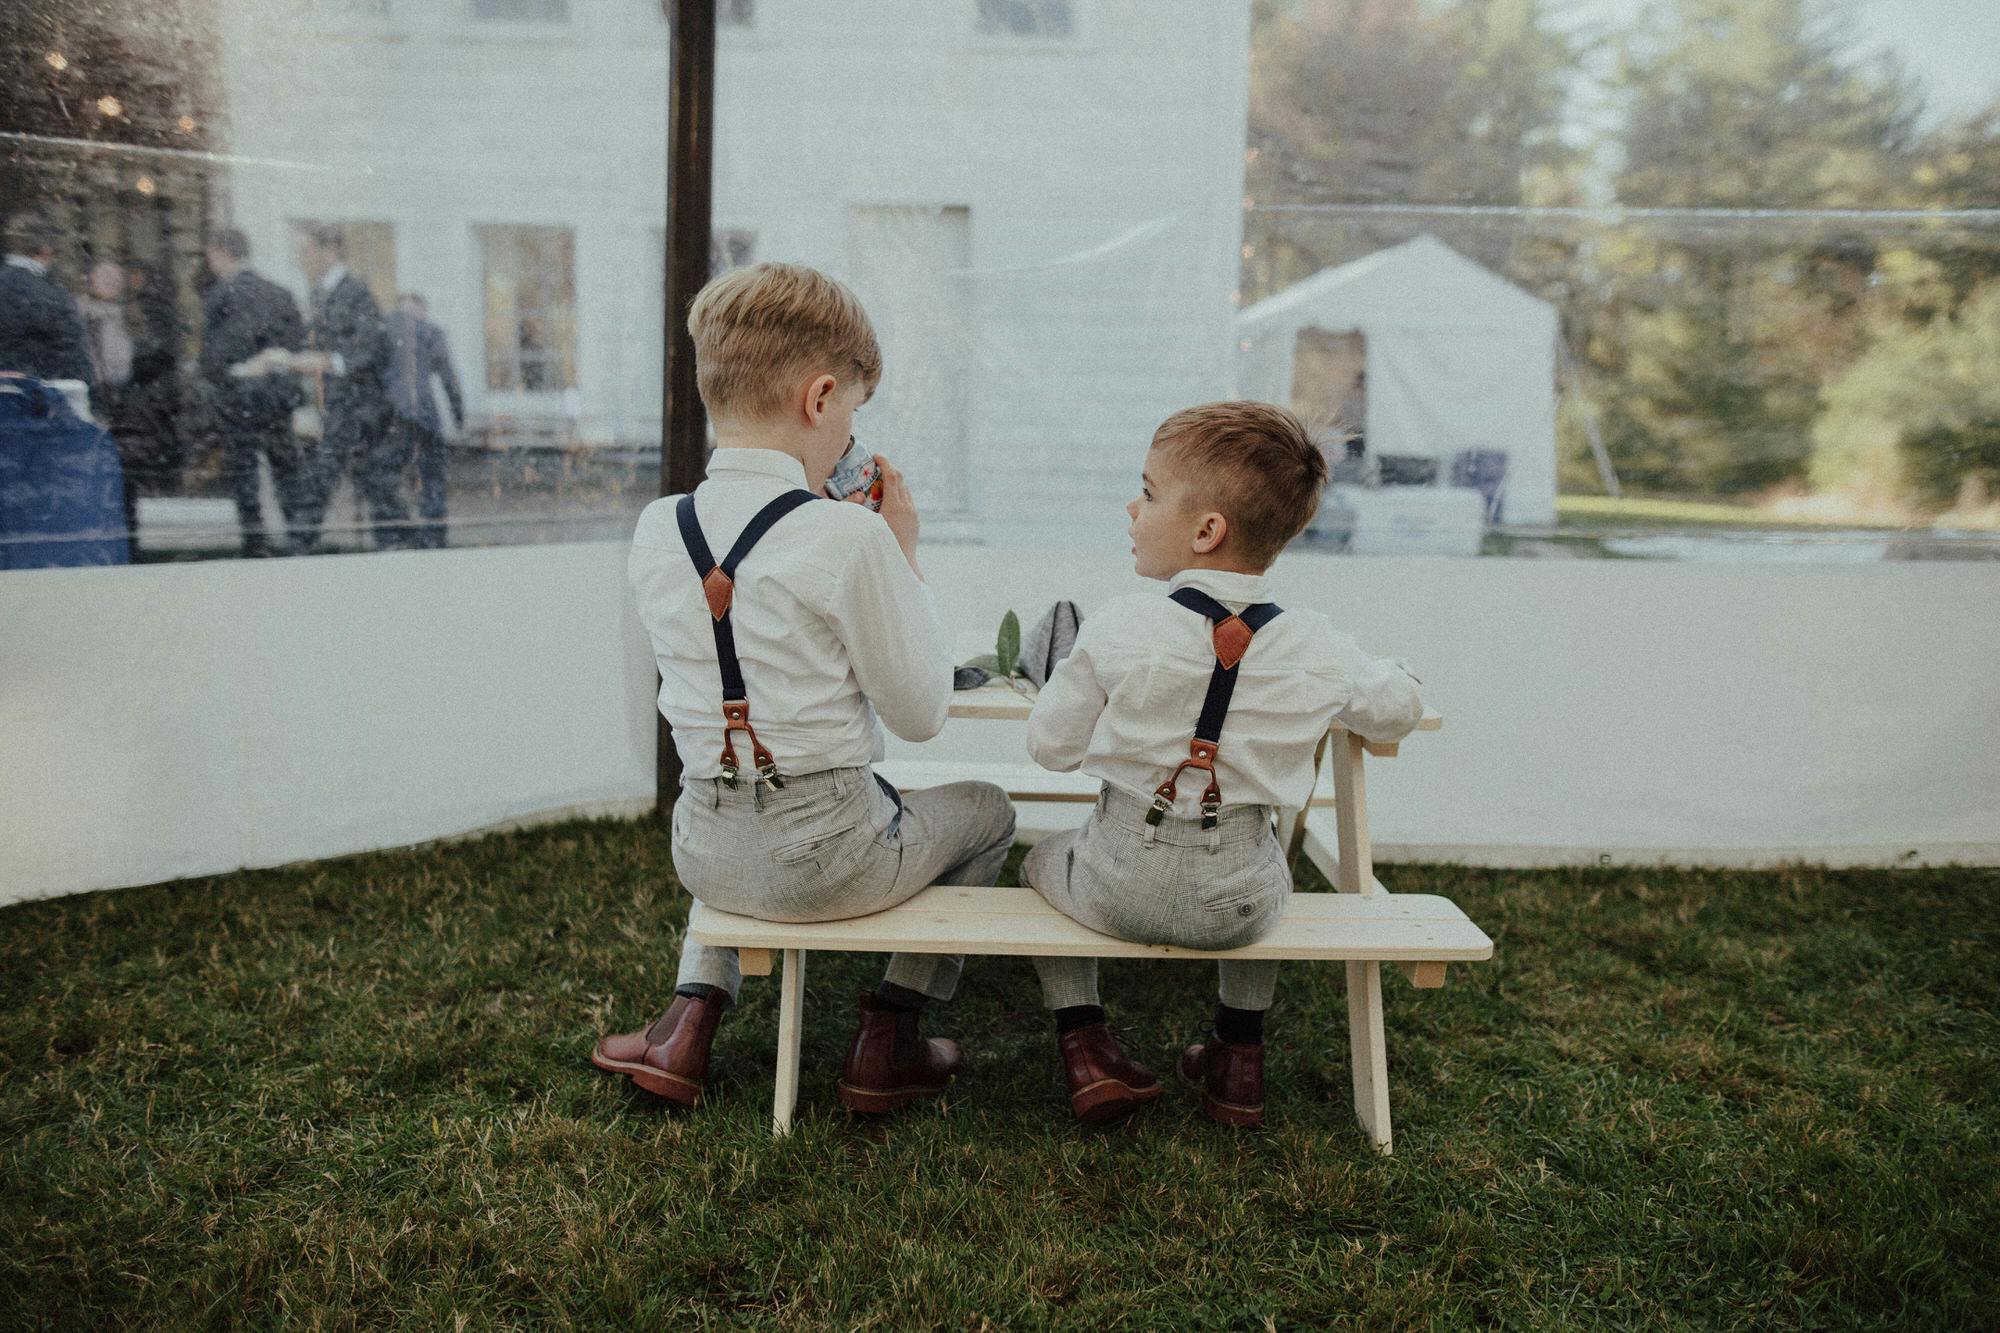 two ring bearers at their own table at a wedding